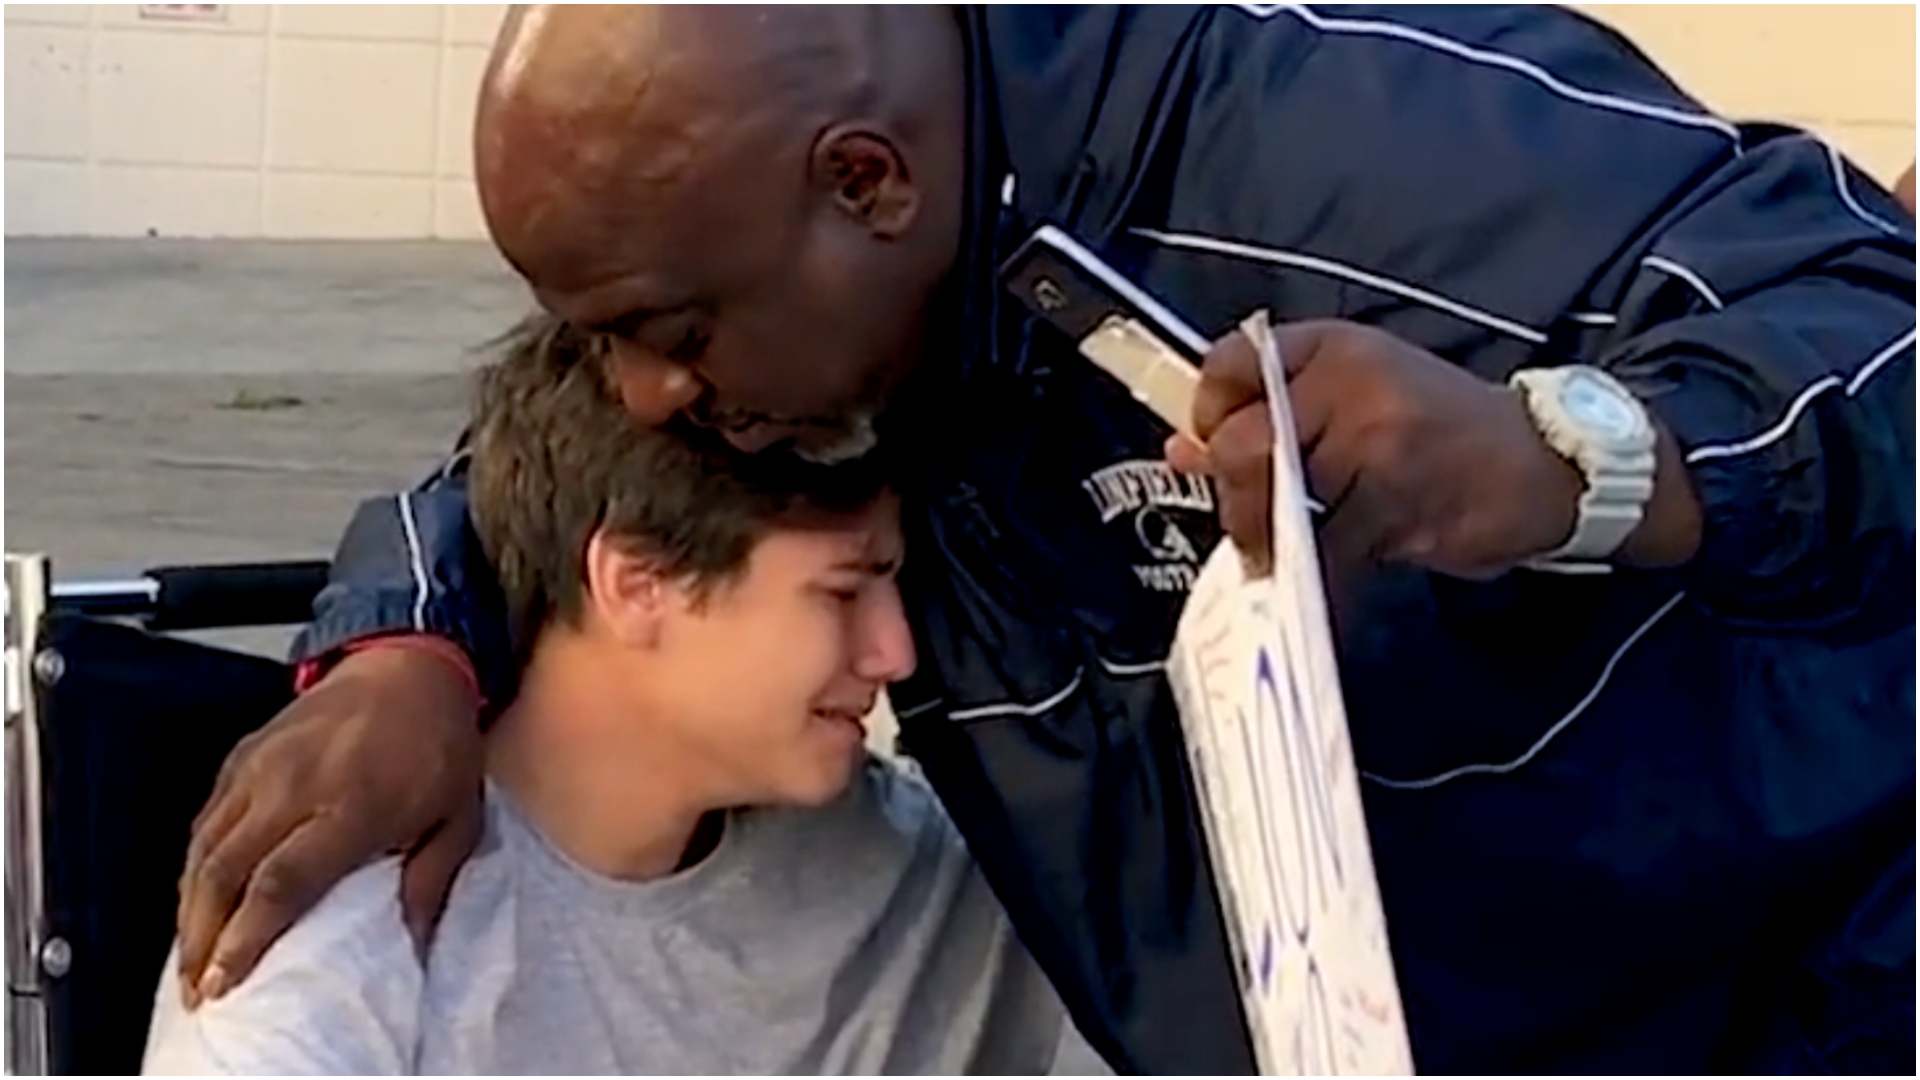 SC Featured: Horrific football injury builds unlikely friendship